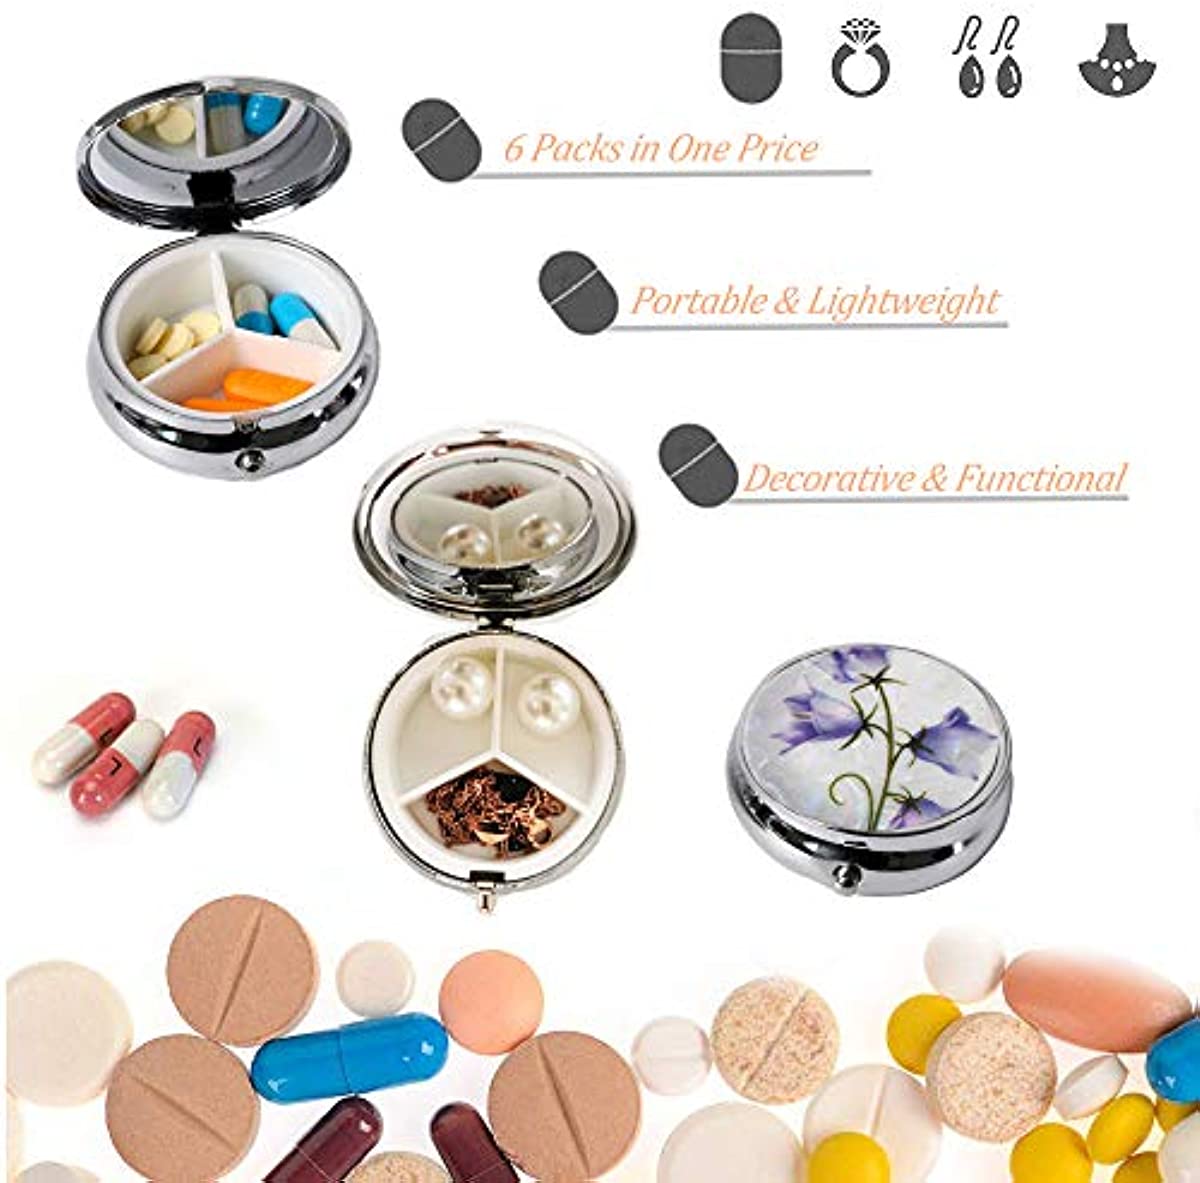 6Pcs Elegant Pill Box Case, CREATIEE-PRO Portable Medicine Tablet Vitamin Holder Organizer with 3 Component for Purse Pocket Travel Gift - Practical & Fashionable(6 Patterns, 1.6Inches)